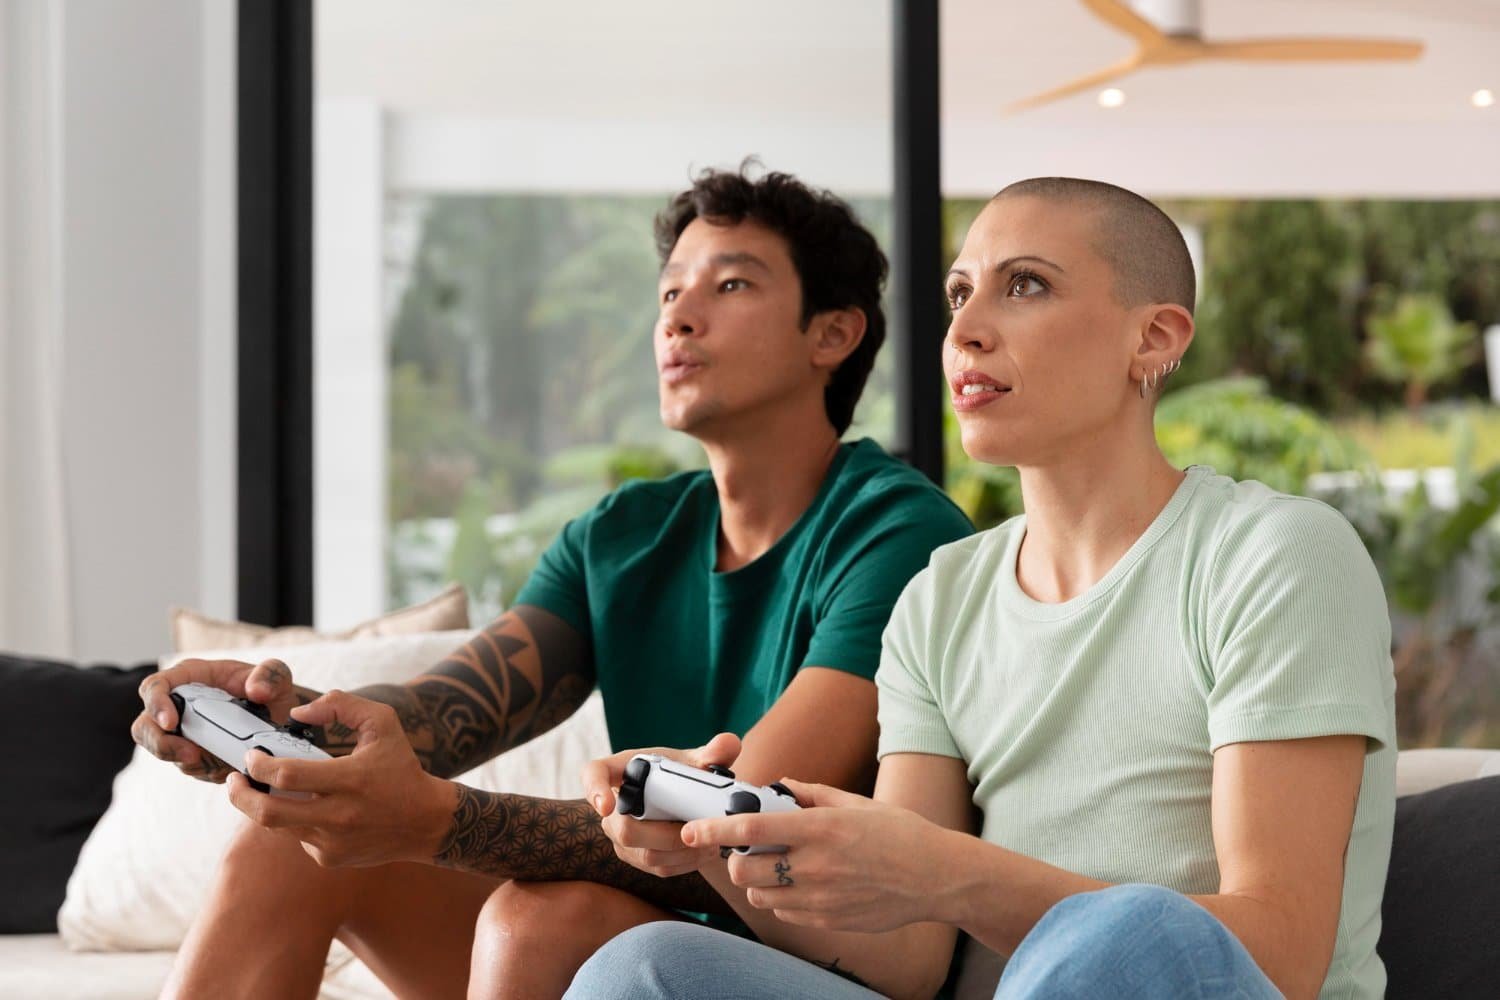 Gaming for Mental Health and Wellness